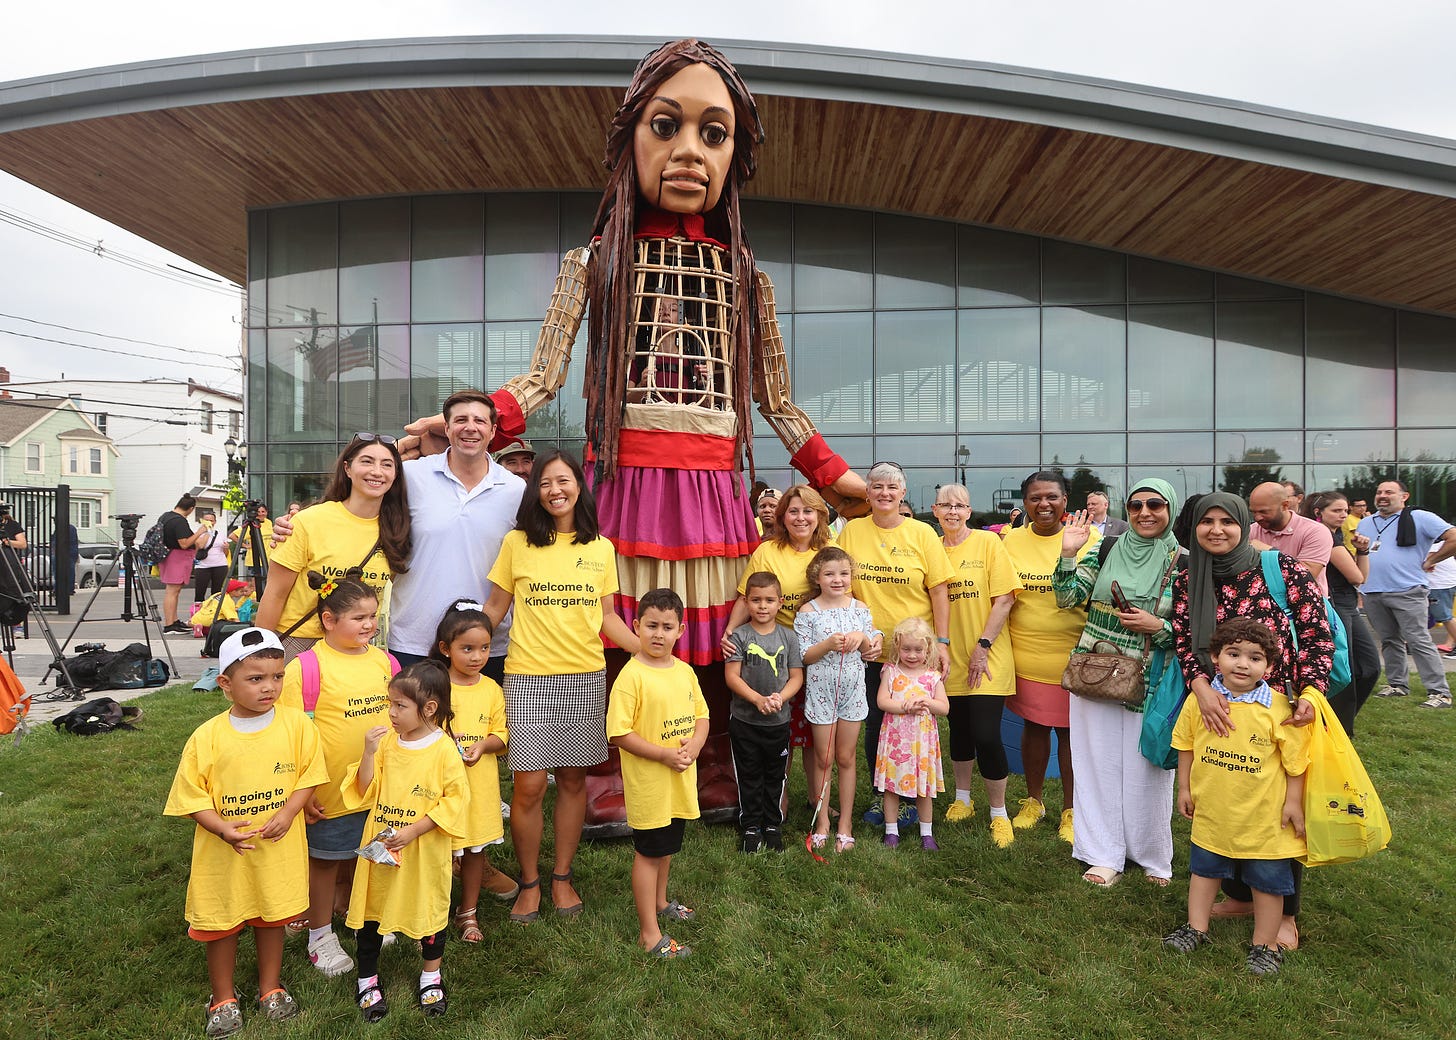 The Countdown to Kindergarten organizers, local electeds, and incoming Kindergarteners smile for a picture with the 12-foot puppet, Little Amal, outside the East Boston library